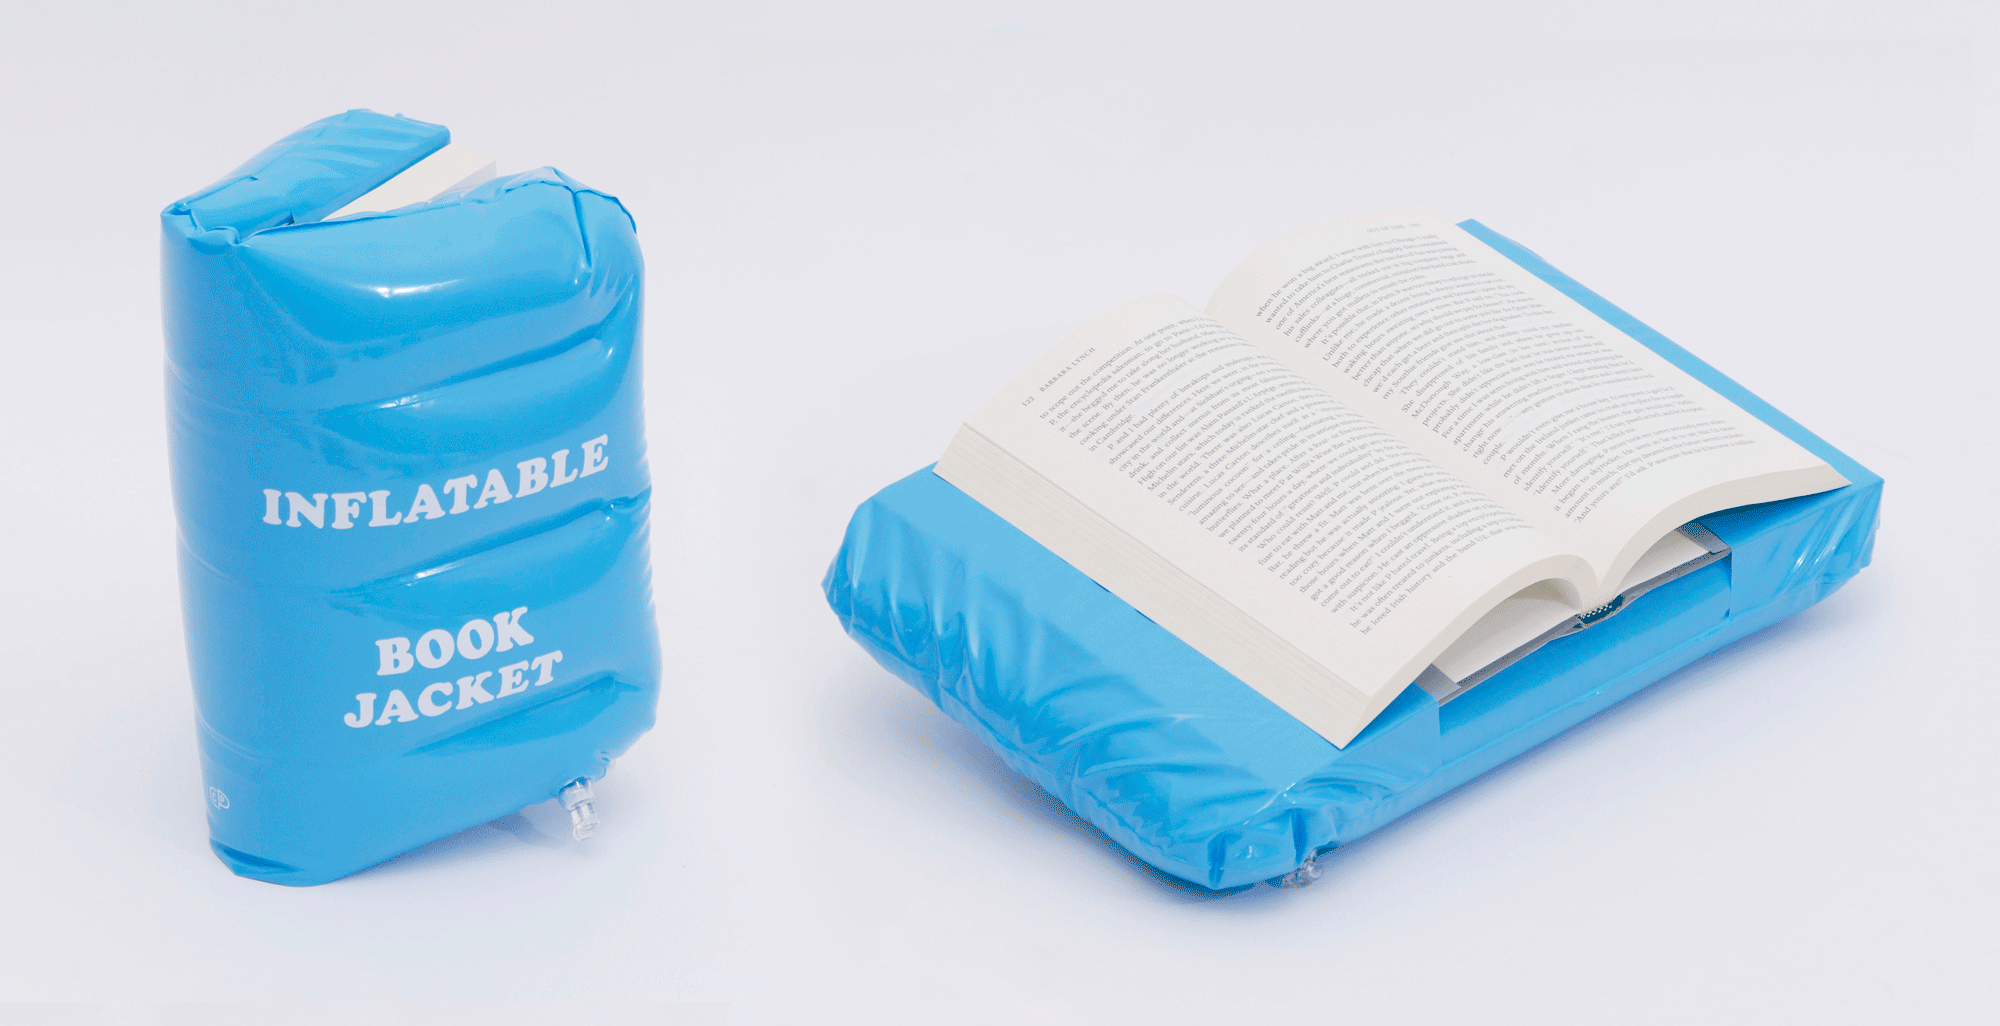 light blue inflatable book jacket that looks like a water wing